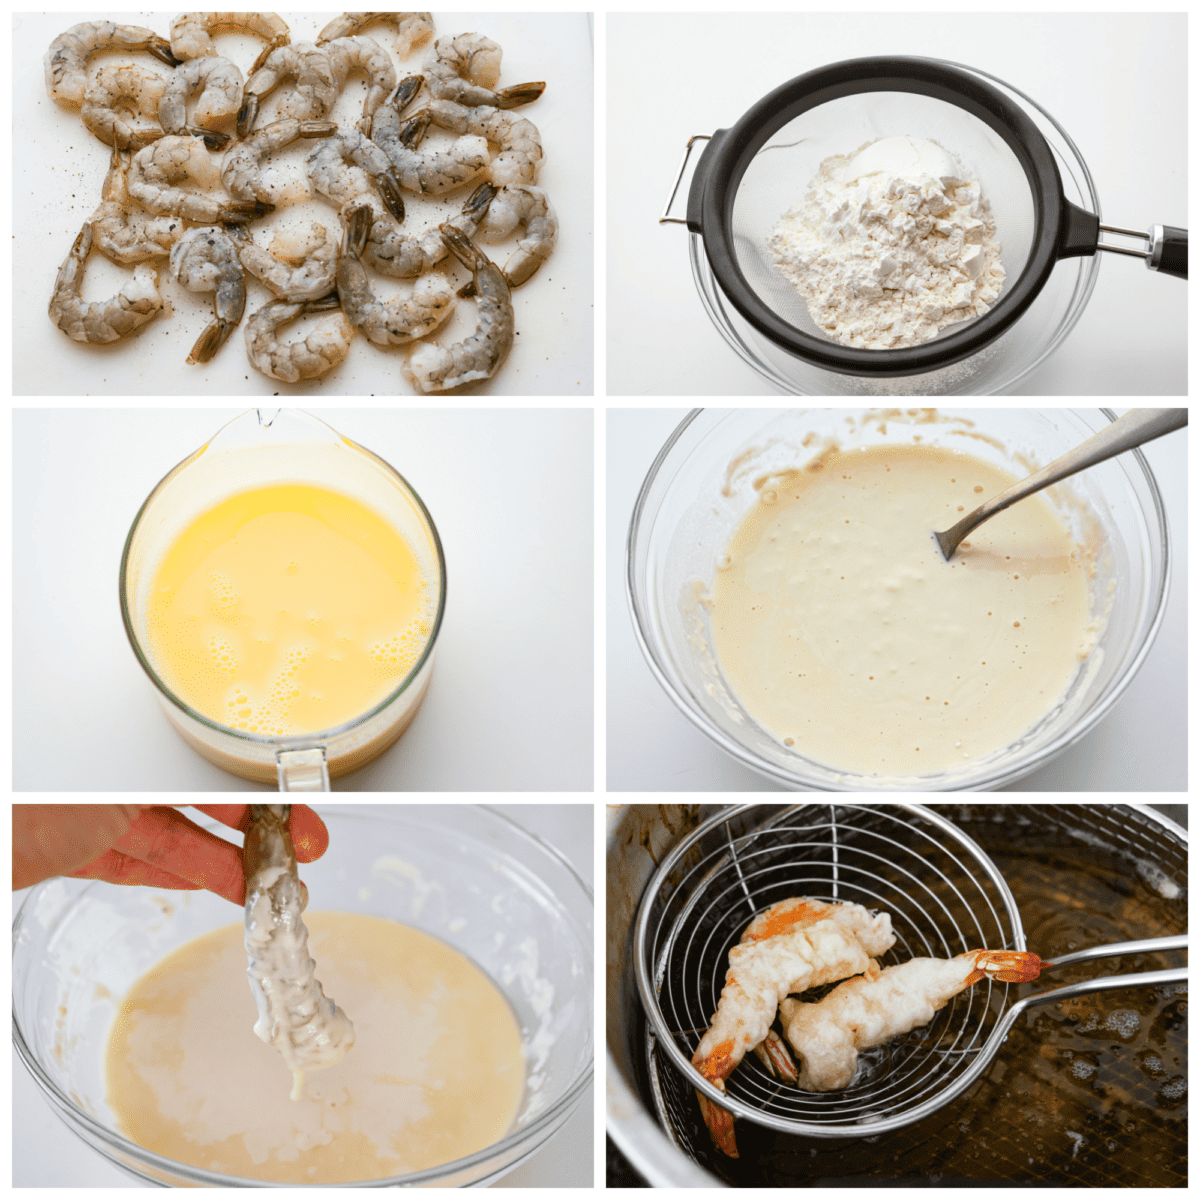 6-photo collage of the shrimp being battered and fried.